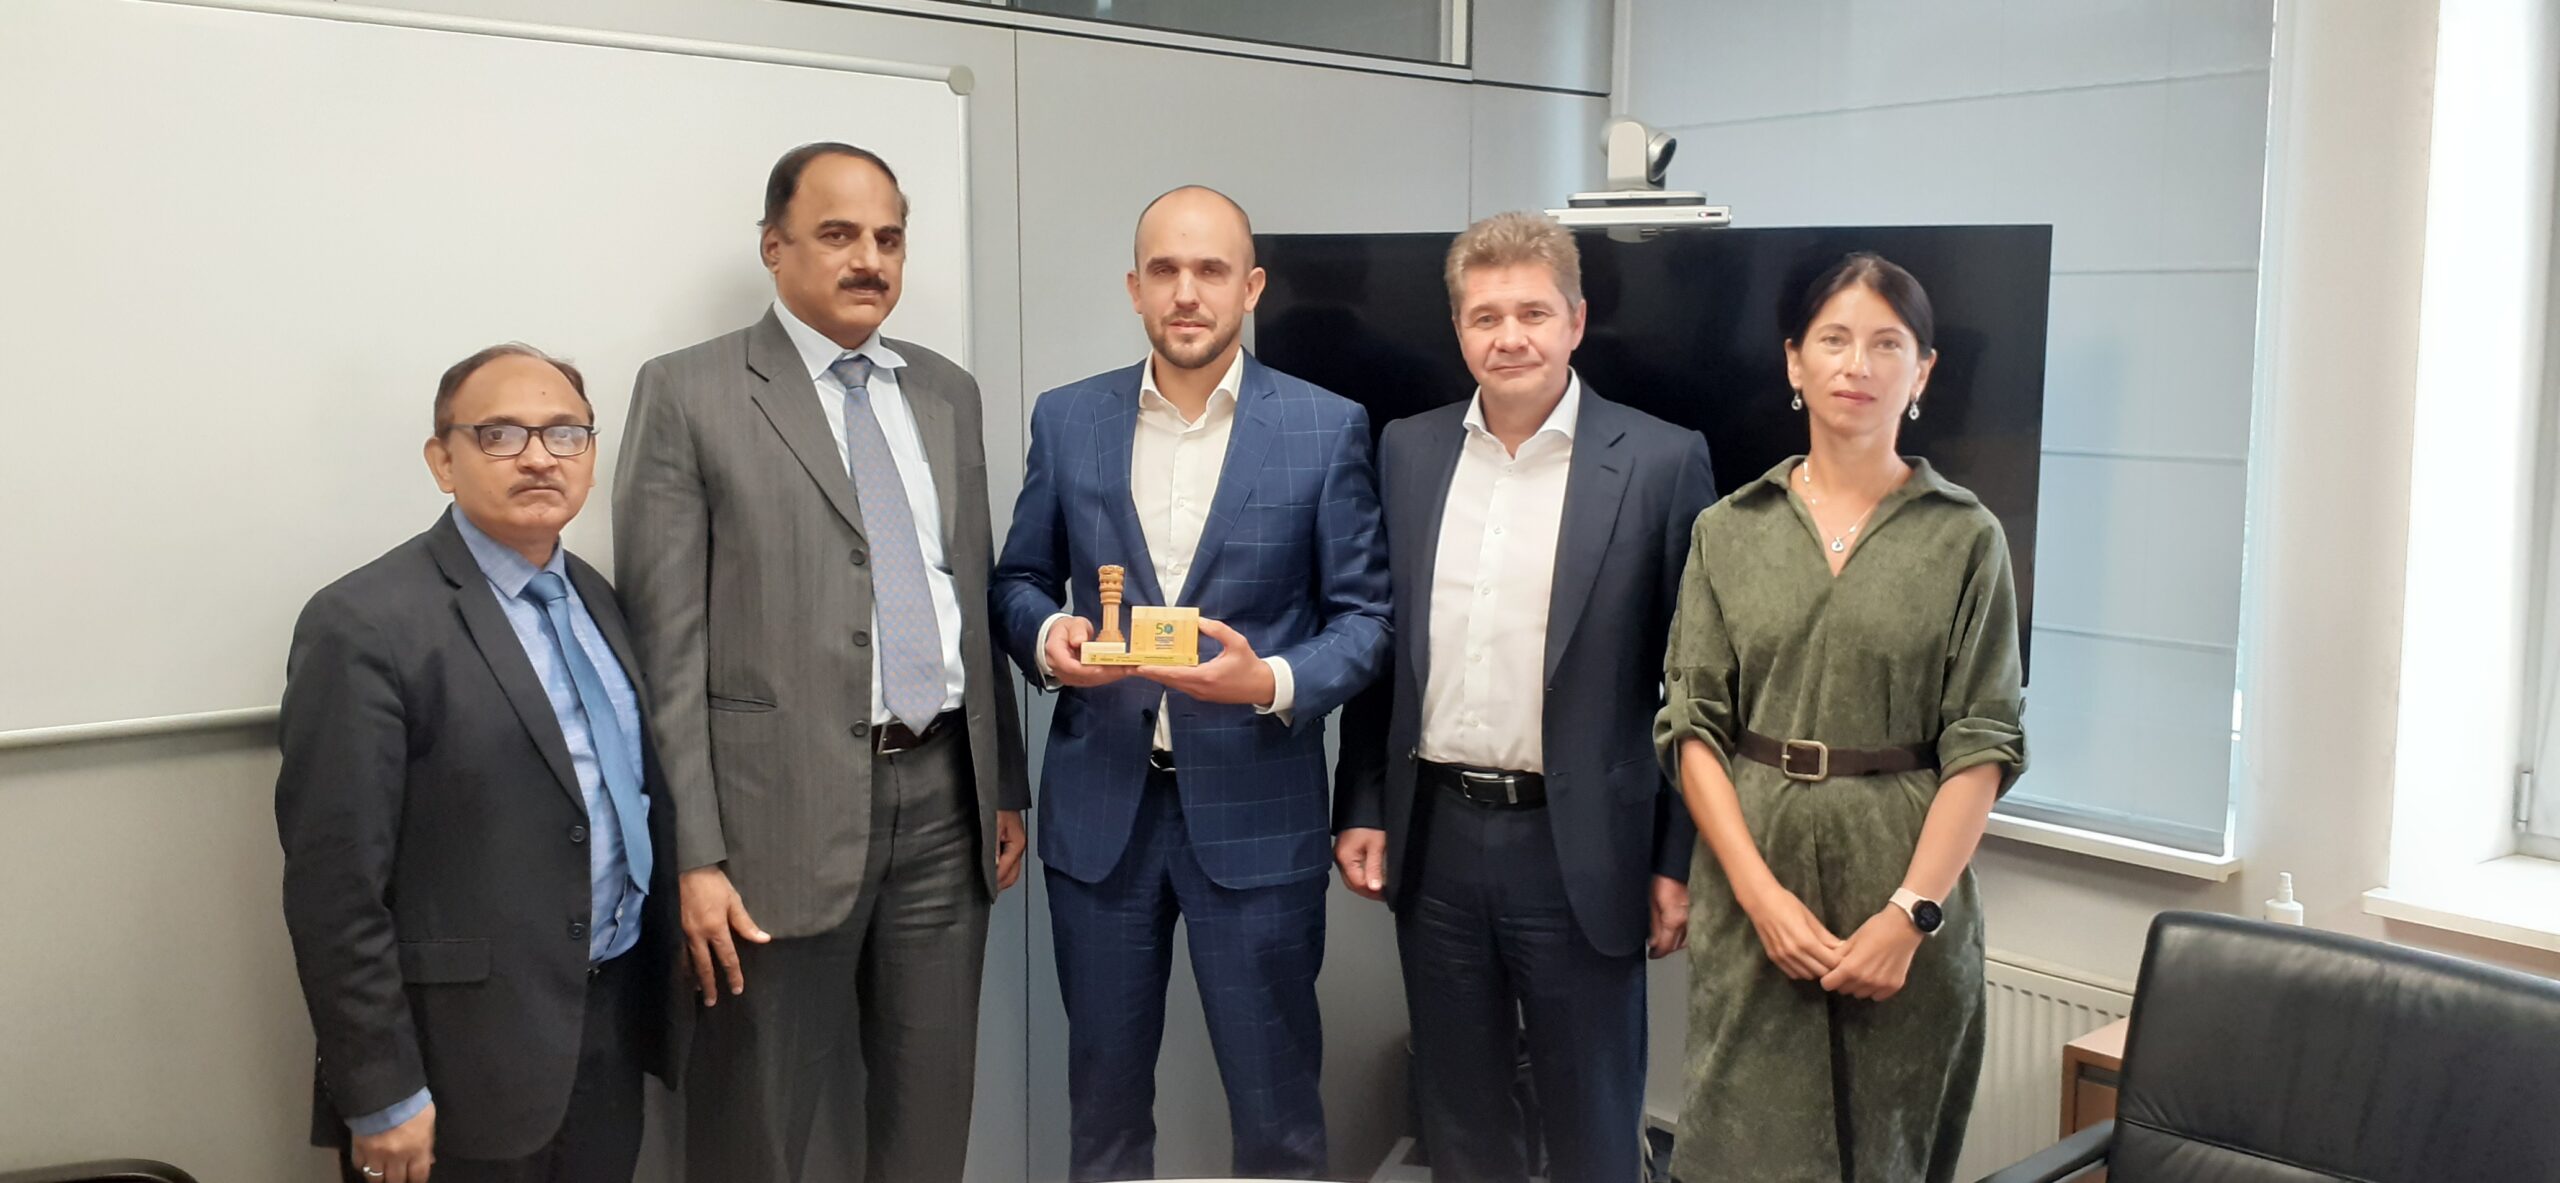 Meeting with Mr Merzlyakov Sergey,Chairman of the board of Orgsyntes . They are largest producer of chlor alkali in Russia. They will be participating at the Chlor Alkali @Chemtech 2024, and also are keen to partner with Indian companies